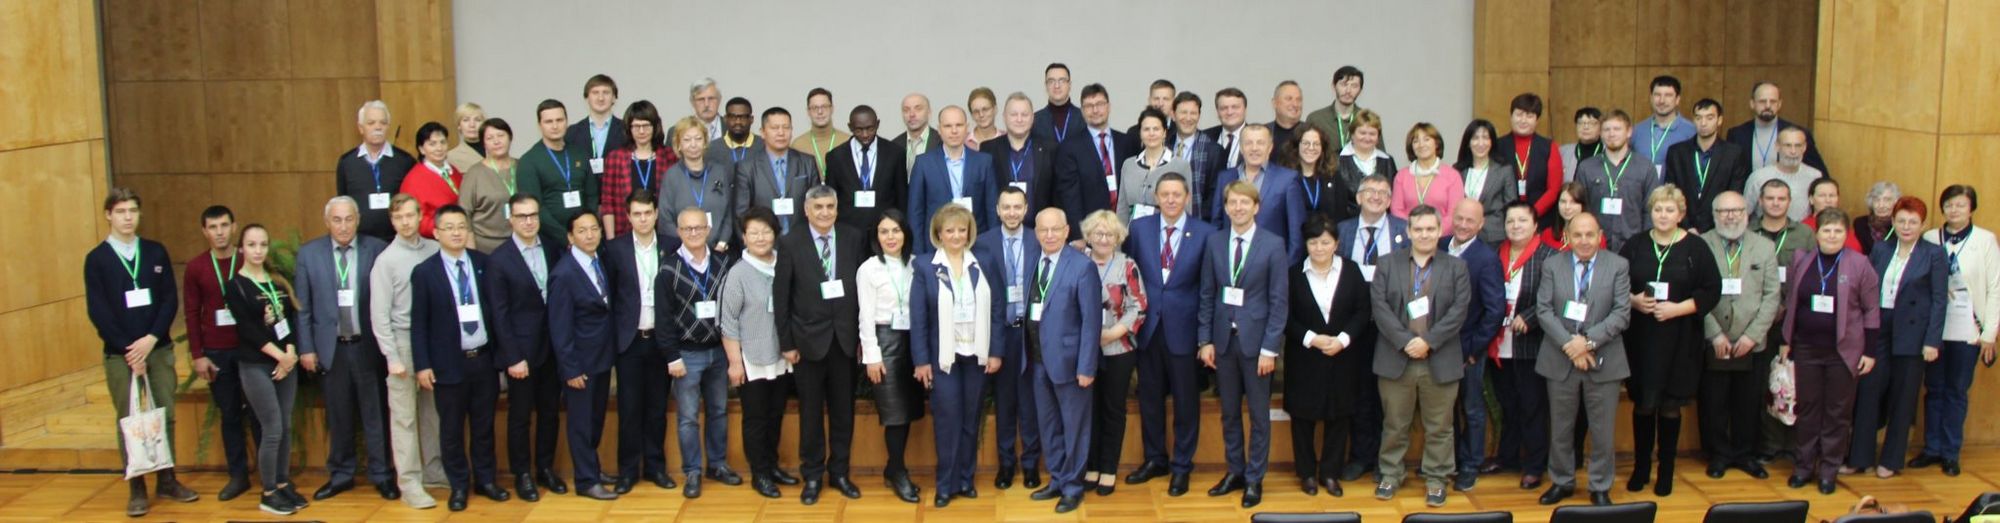 Participants_of_the_World_Soil_Day__Sochi__Russian_Federation__2019